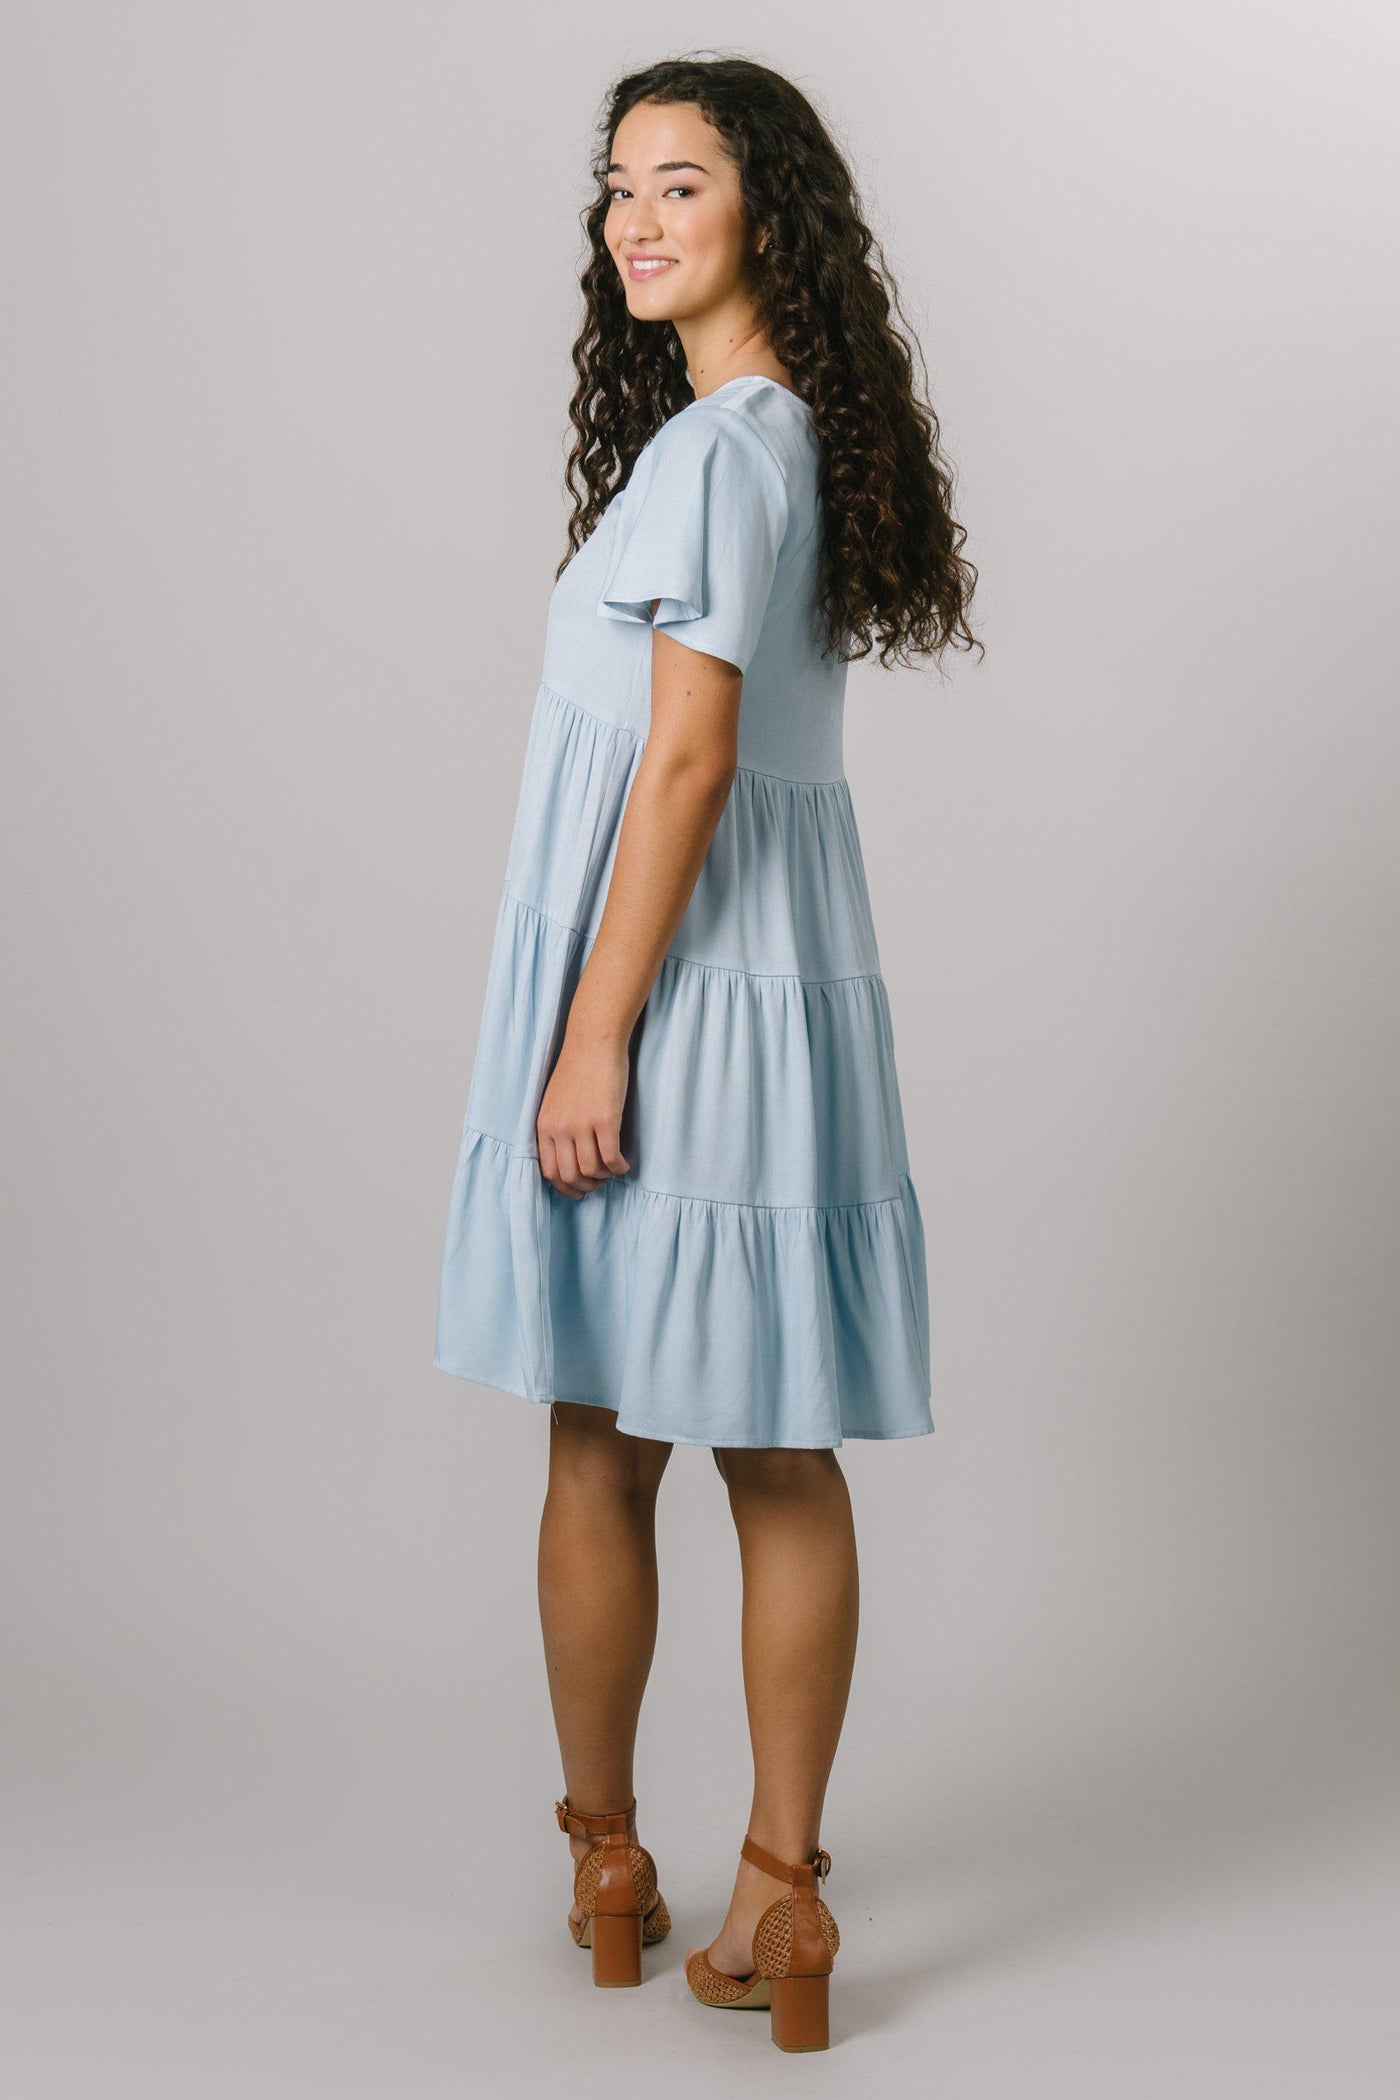 A back shot of a modest, loose fitting everyday dress that features a scoop neck and flutter sleeves in baby blue.